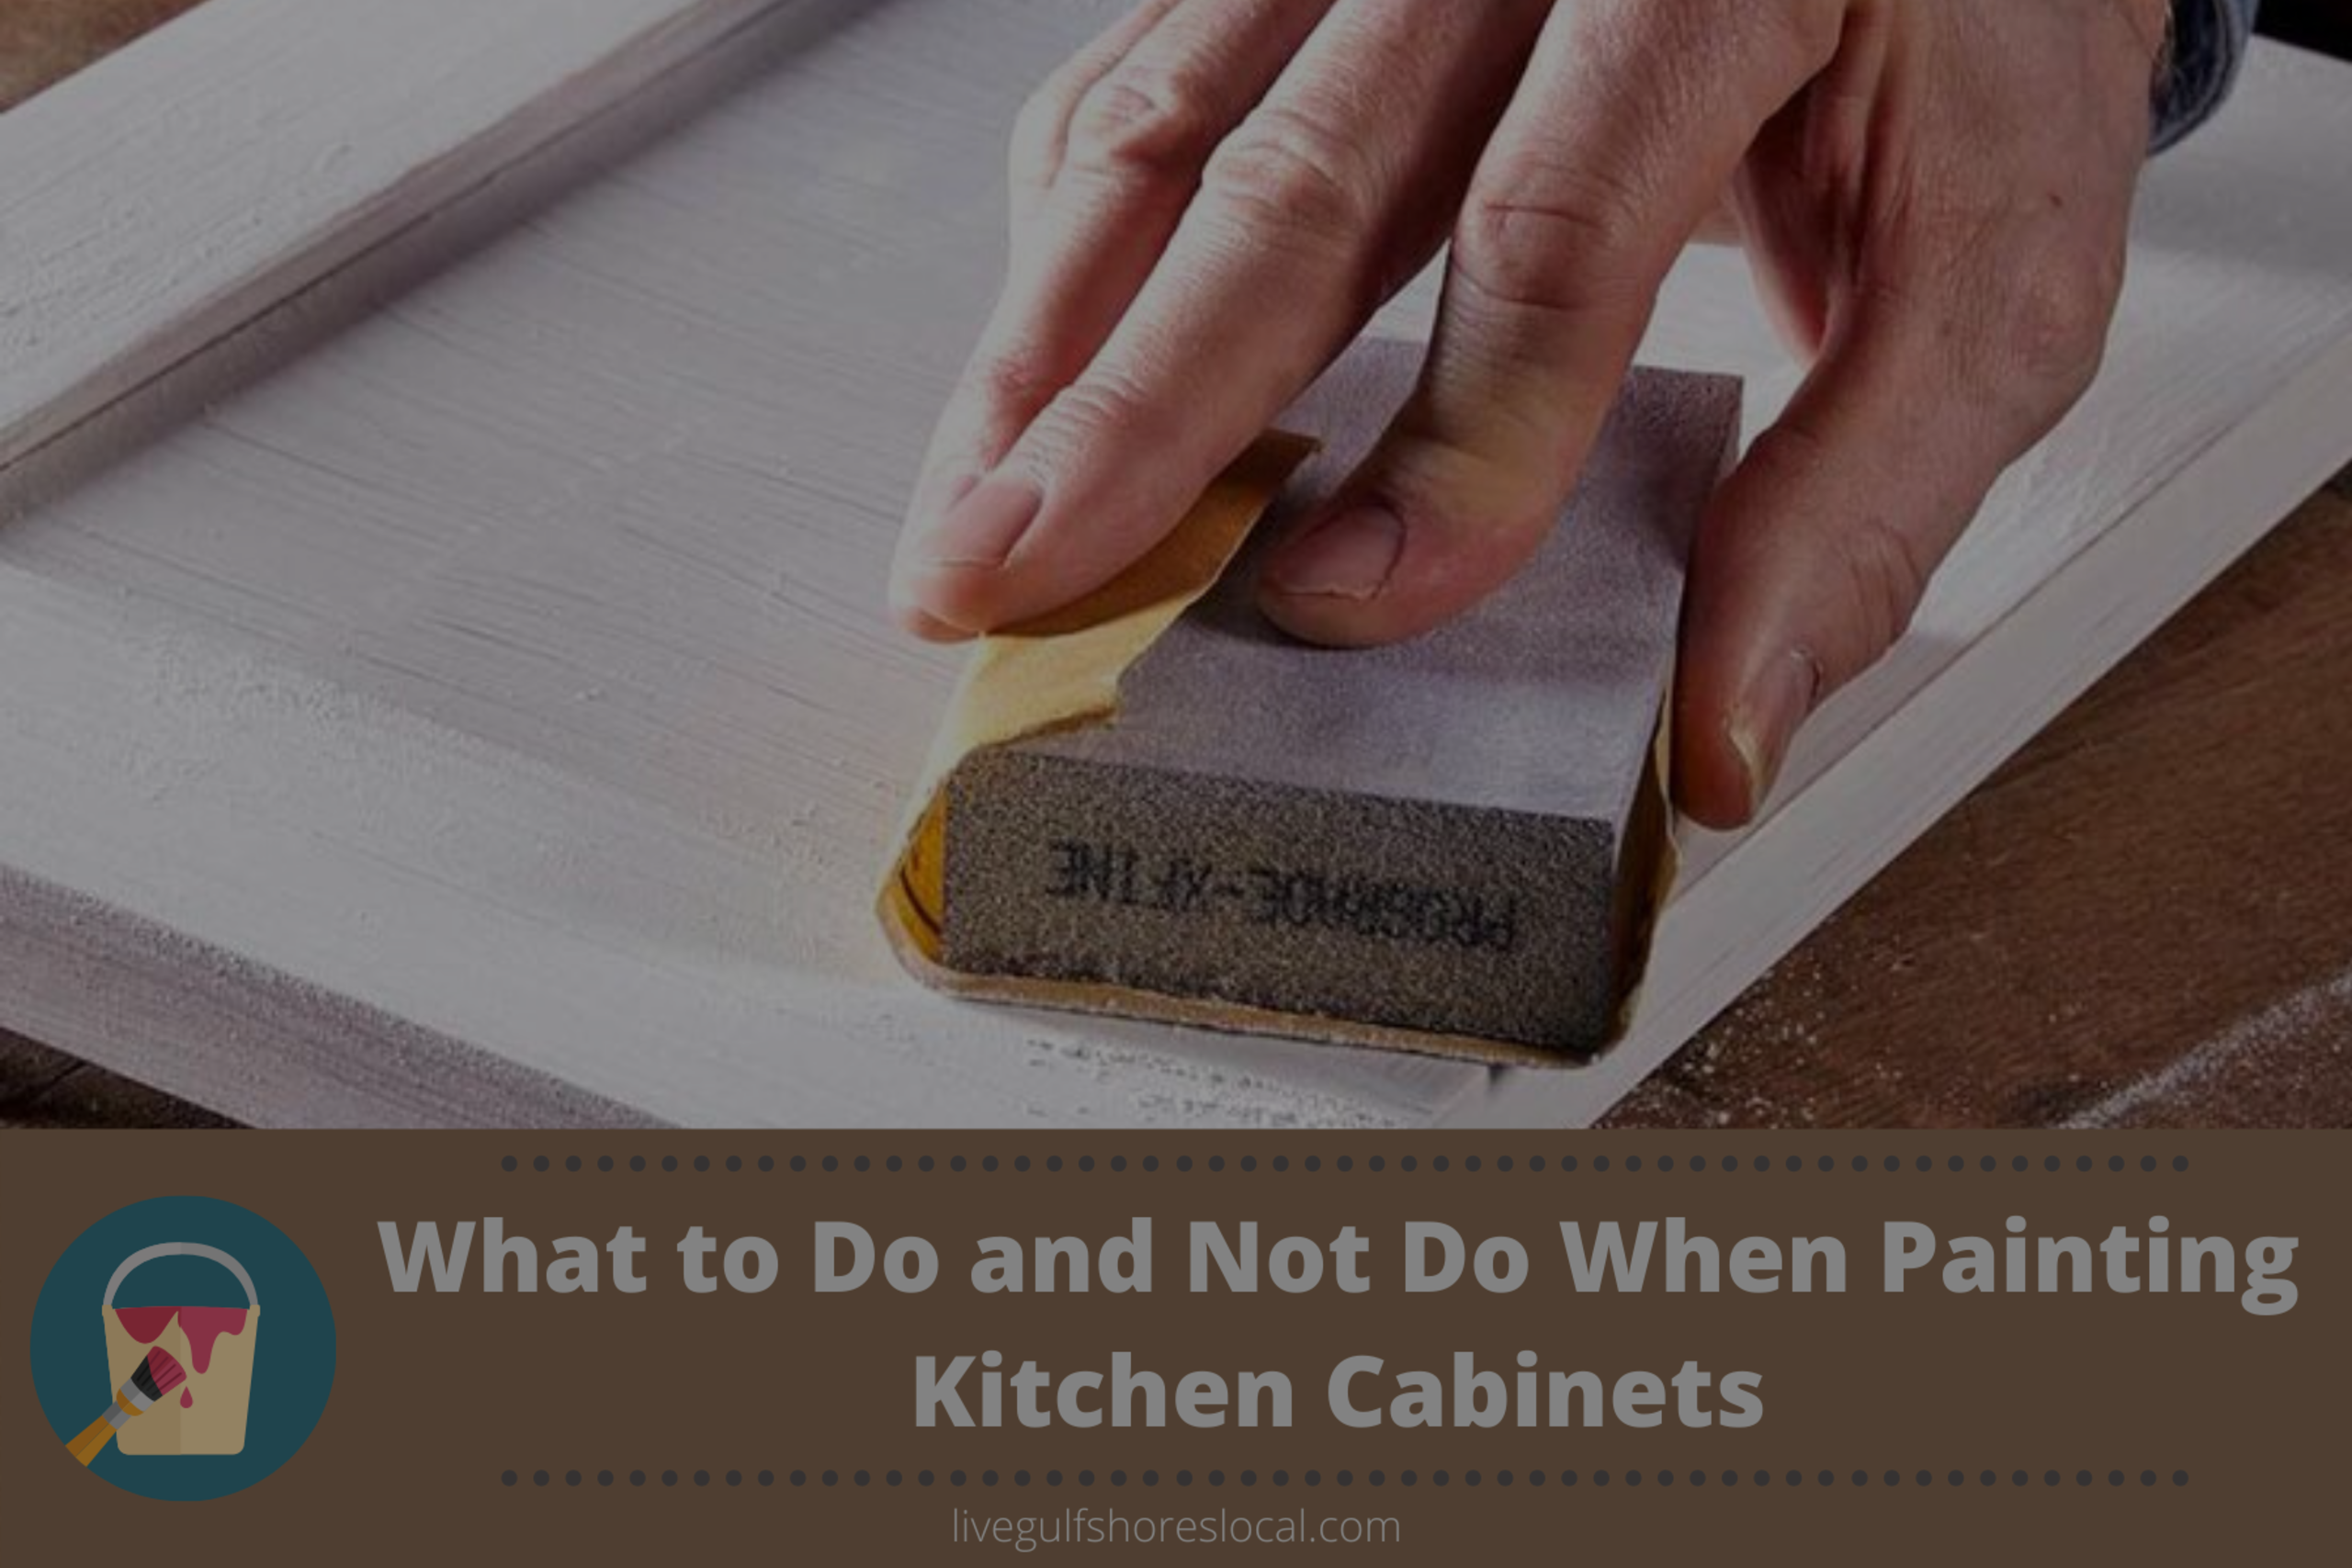 9 Easy Facts About Why I Had My Kitchen Cabinets Painted Twice In Two Weeks ... Shown